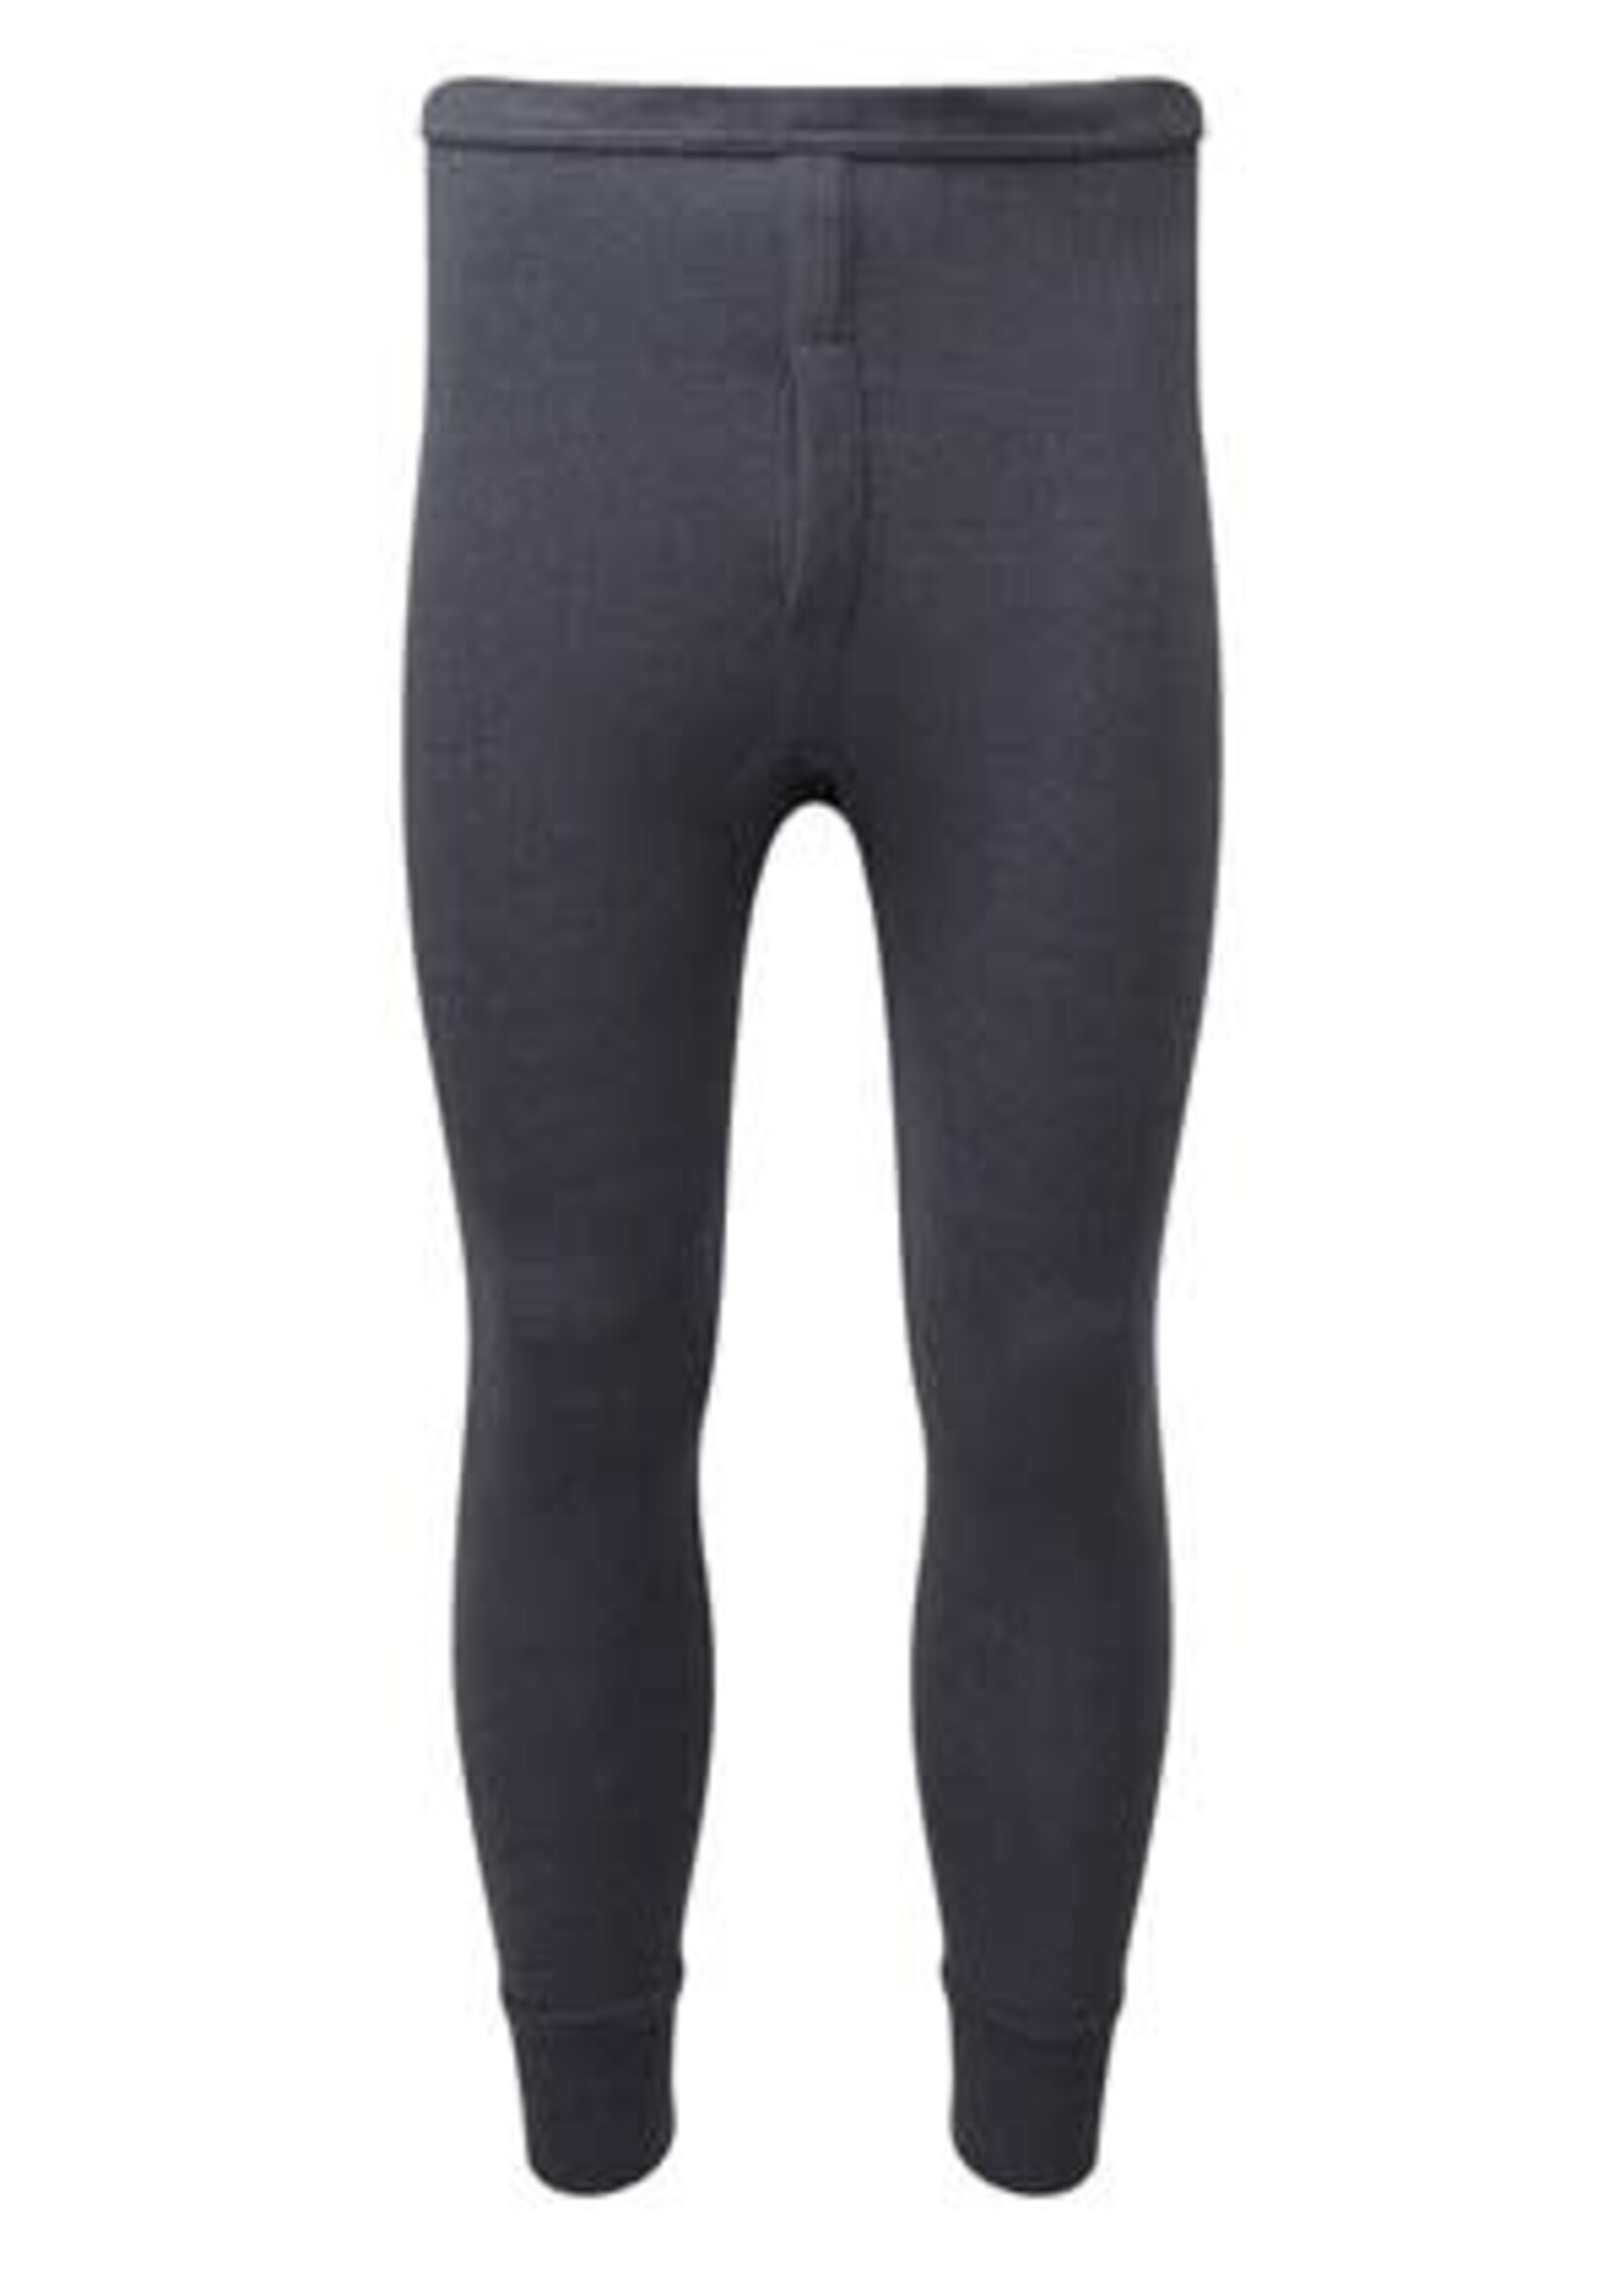 FORT Workwear Thermal Long Johns 803 FORT